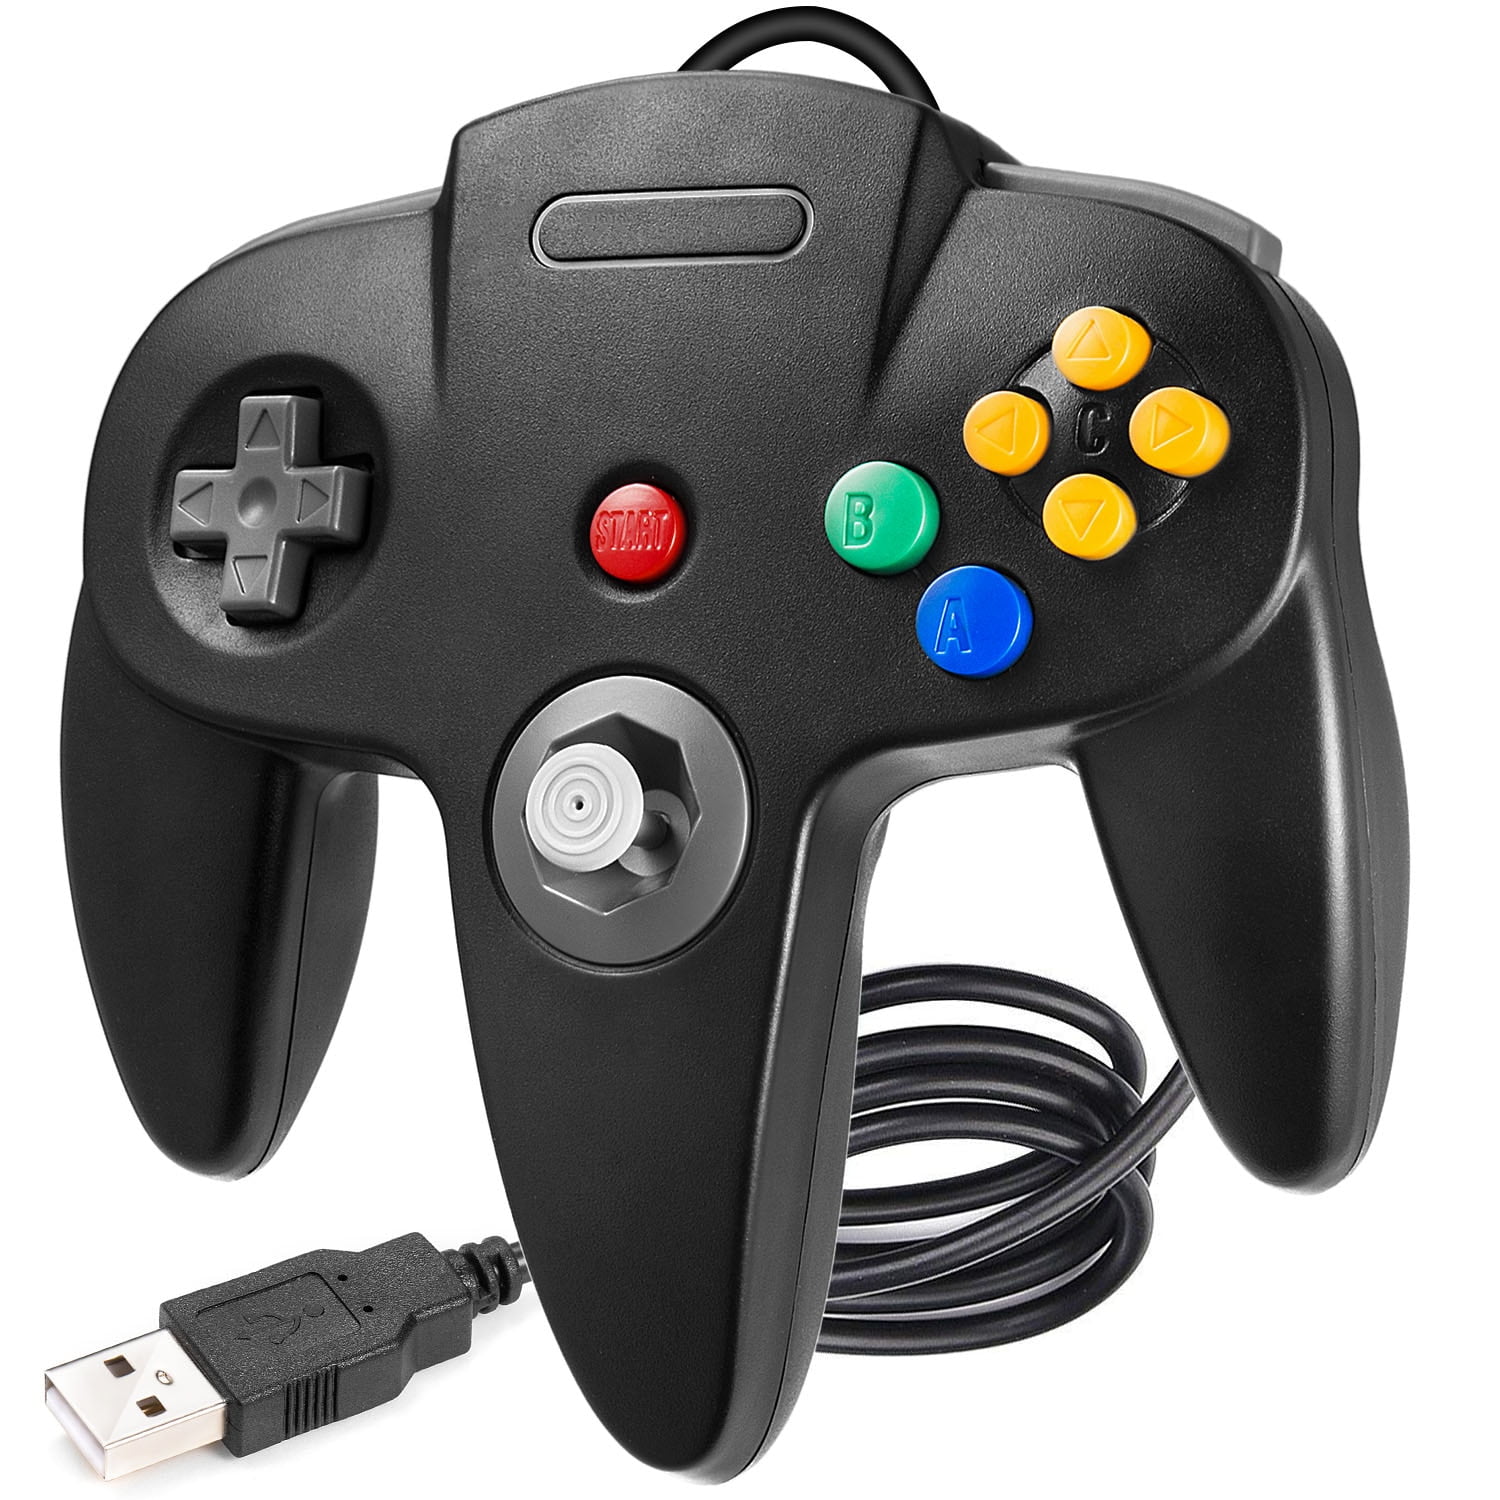 iNNEXT N64 Wired USB PC Game pad Joystick 2 Pack Classic N64 Controller N64 Bit USB Wired Game stick Joy pad Controller for Windows PC MAC Linux Raspberry Pi 3 Genesis Higan 